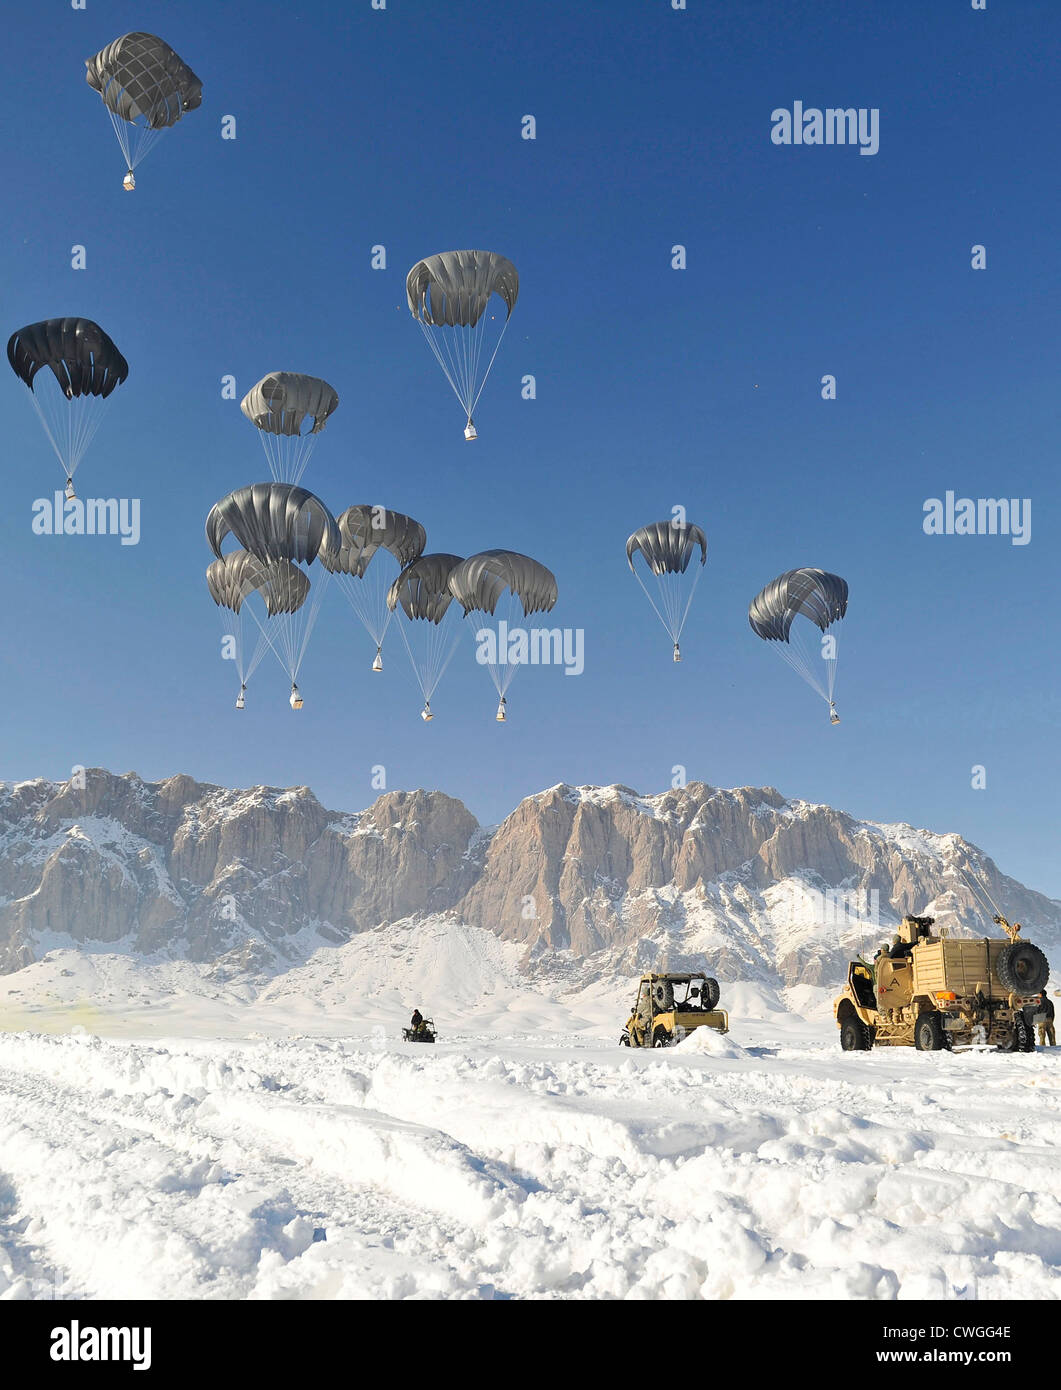 Pallets of supplies descend to the ground during an airdrop January 25, 2012 in Shah Joy district, Zabul province, Afghanistan. Supply drops are a common way to resupply coalition special operations forces in remote areas of Afghanistan. Stock Photo